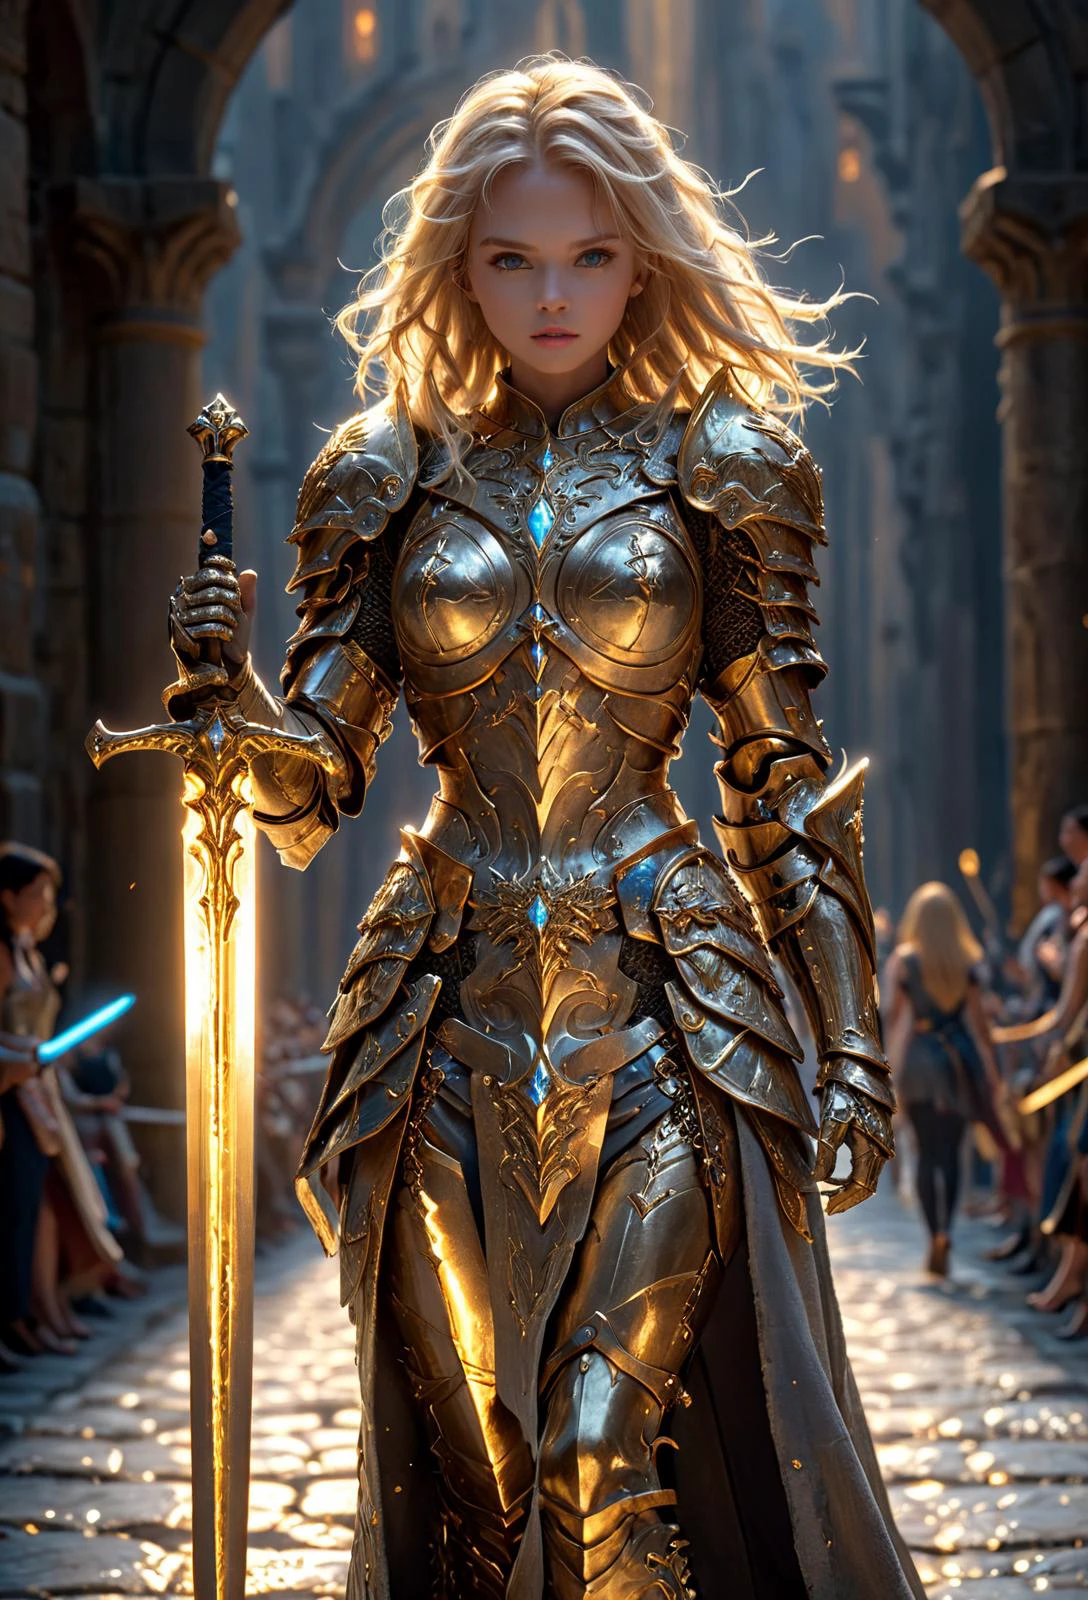 amazing quality, masterpiece, best quality, hyper detailed, ultra detailed, UHD, perfect anatomy,
fashion show, model, stylish pose, wearing fantastic armor, gold armor, holding glowing sword, runway, stone road, soft shades, blond hair, hand up,
HKStyle,
extremely detailed,